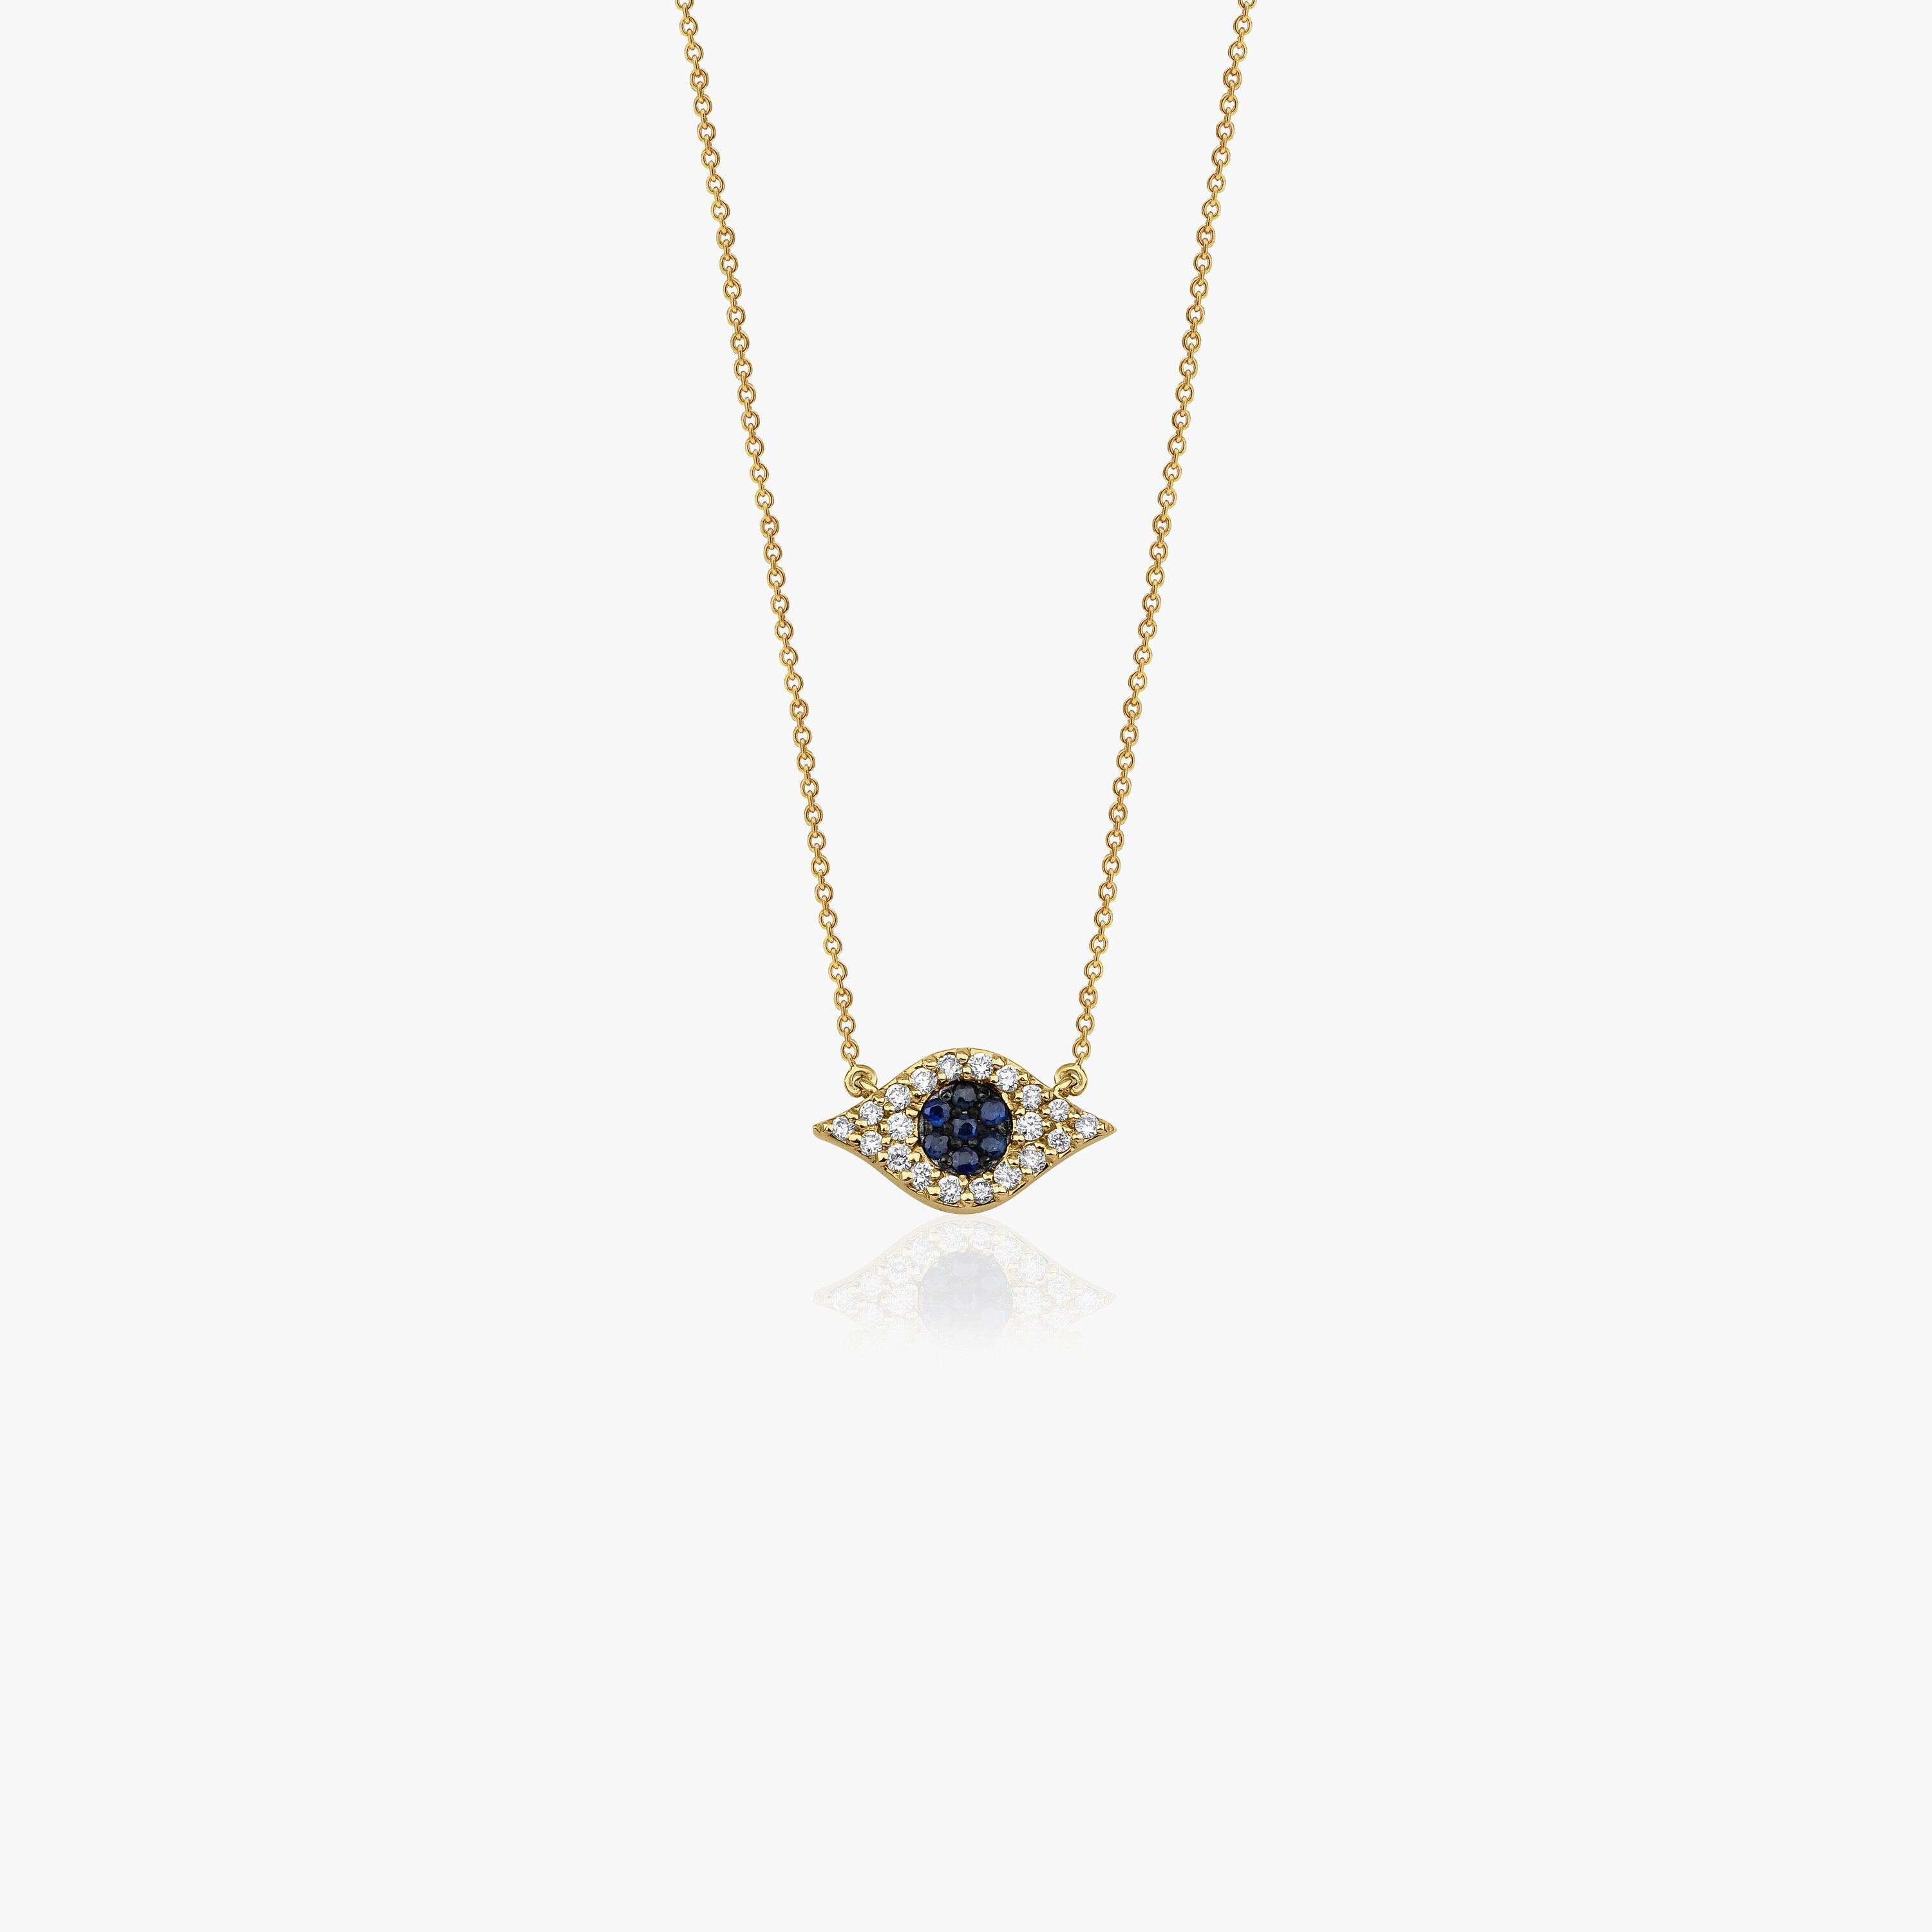 Blue Sapphire and Diamond Necklace in 14K Gold